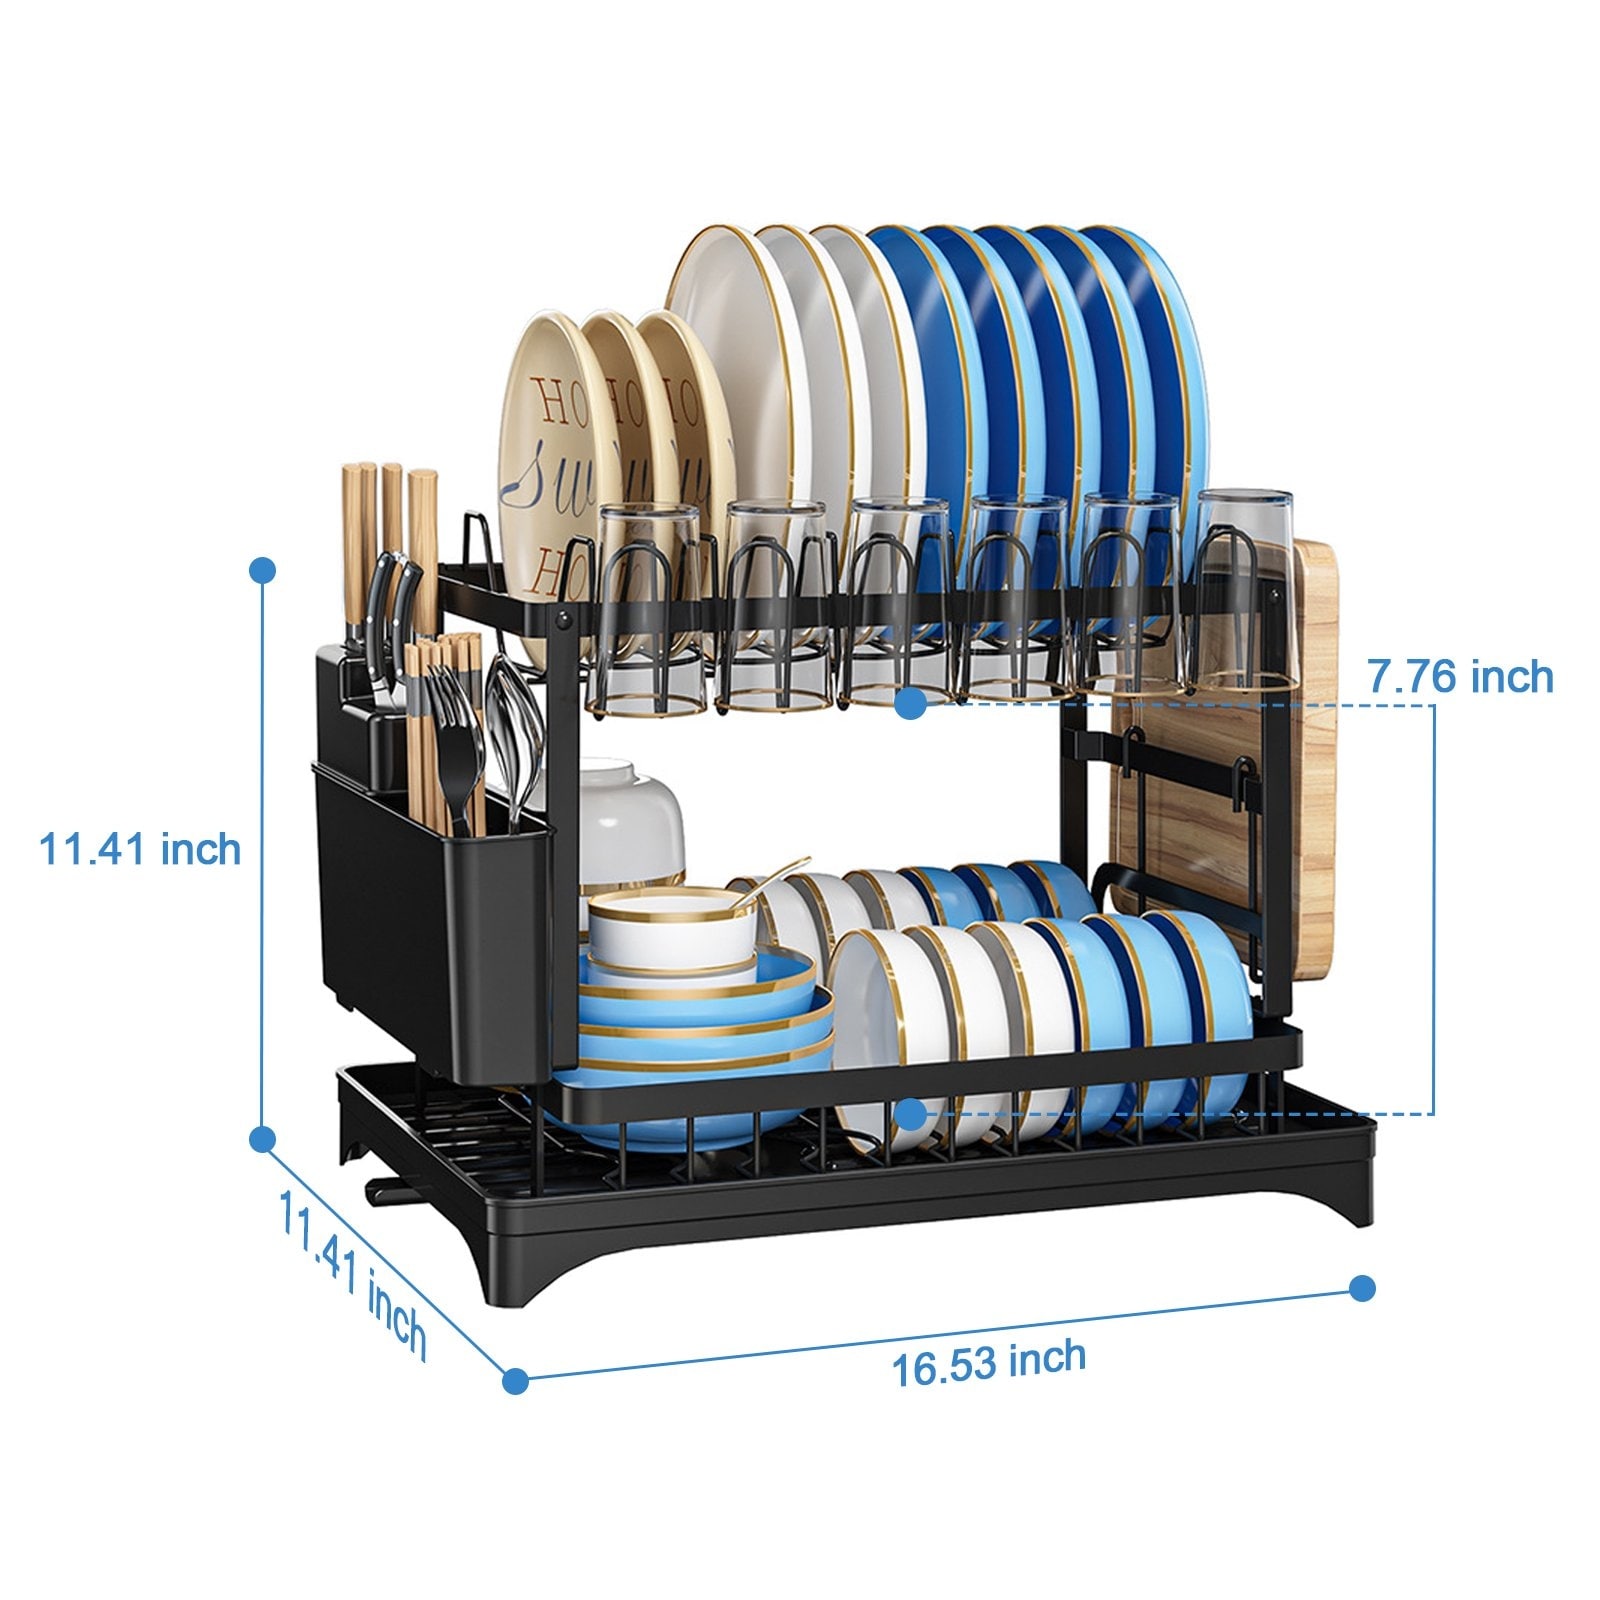 https://ak1.ostkcdn.com/images/products/is/images/direct/cccb2f76ccb6156c5db9b9aa388d0c06618e5a15/2-Tier-Dish-Drying-Rack-with-Drainboard.jpg